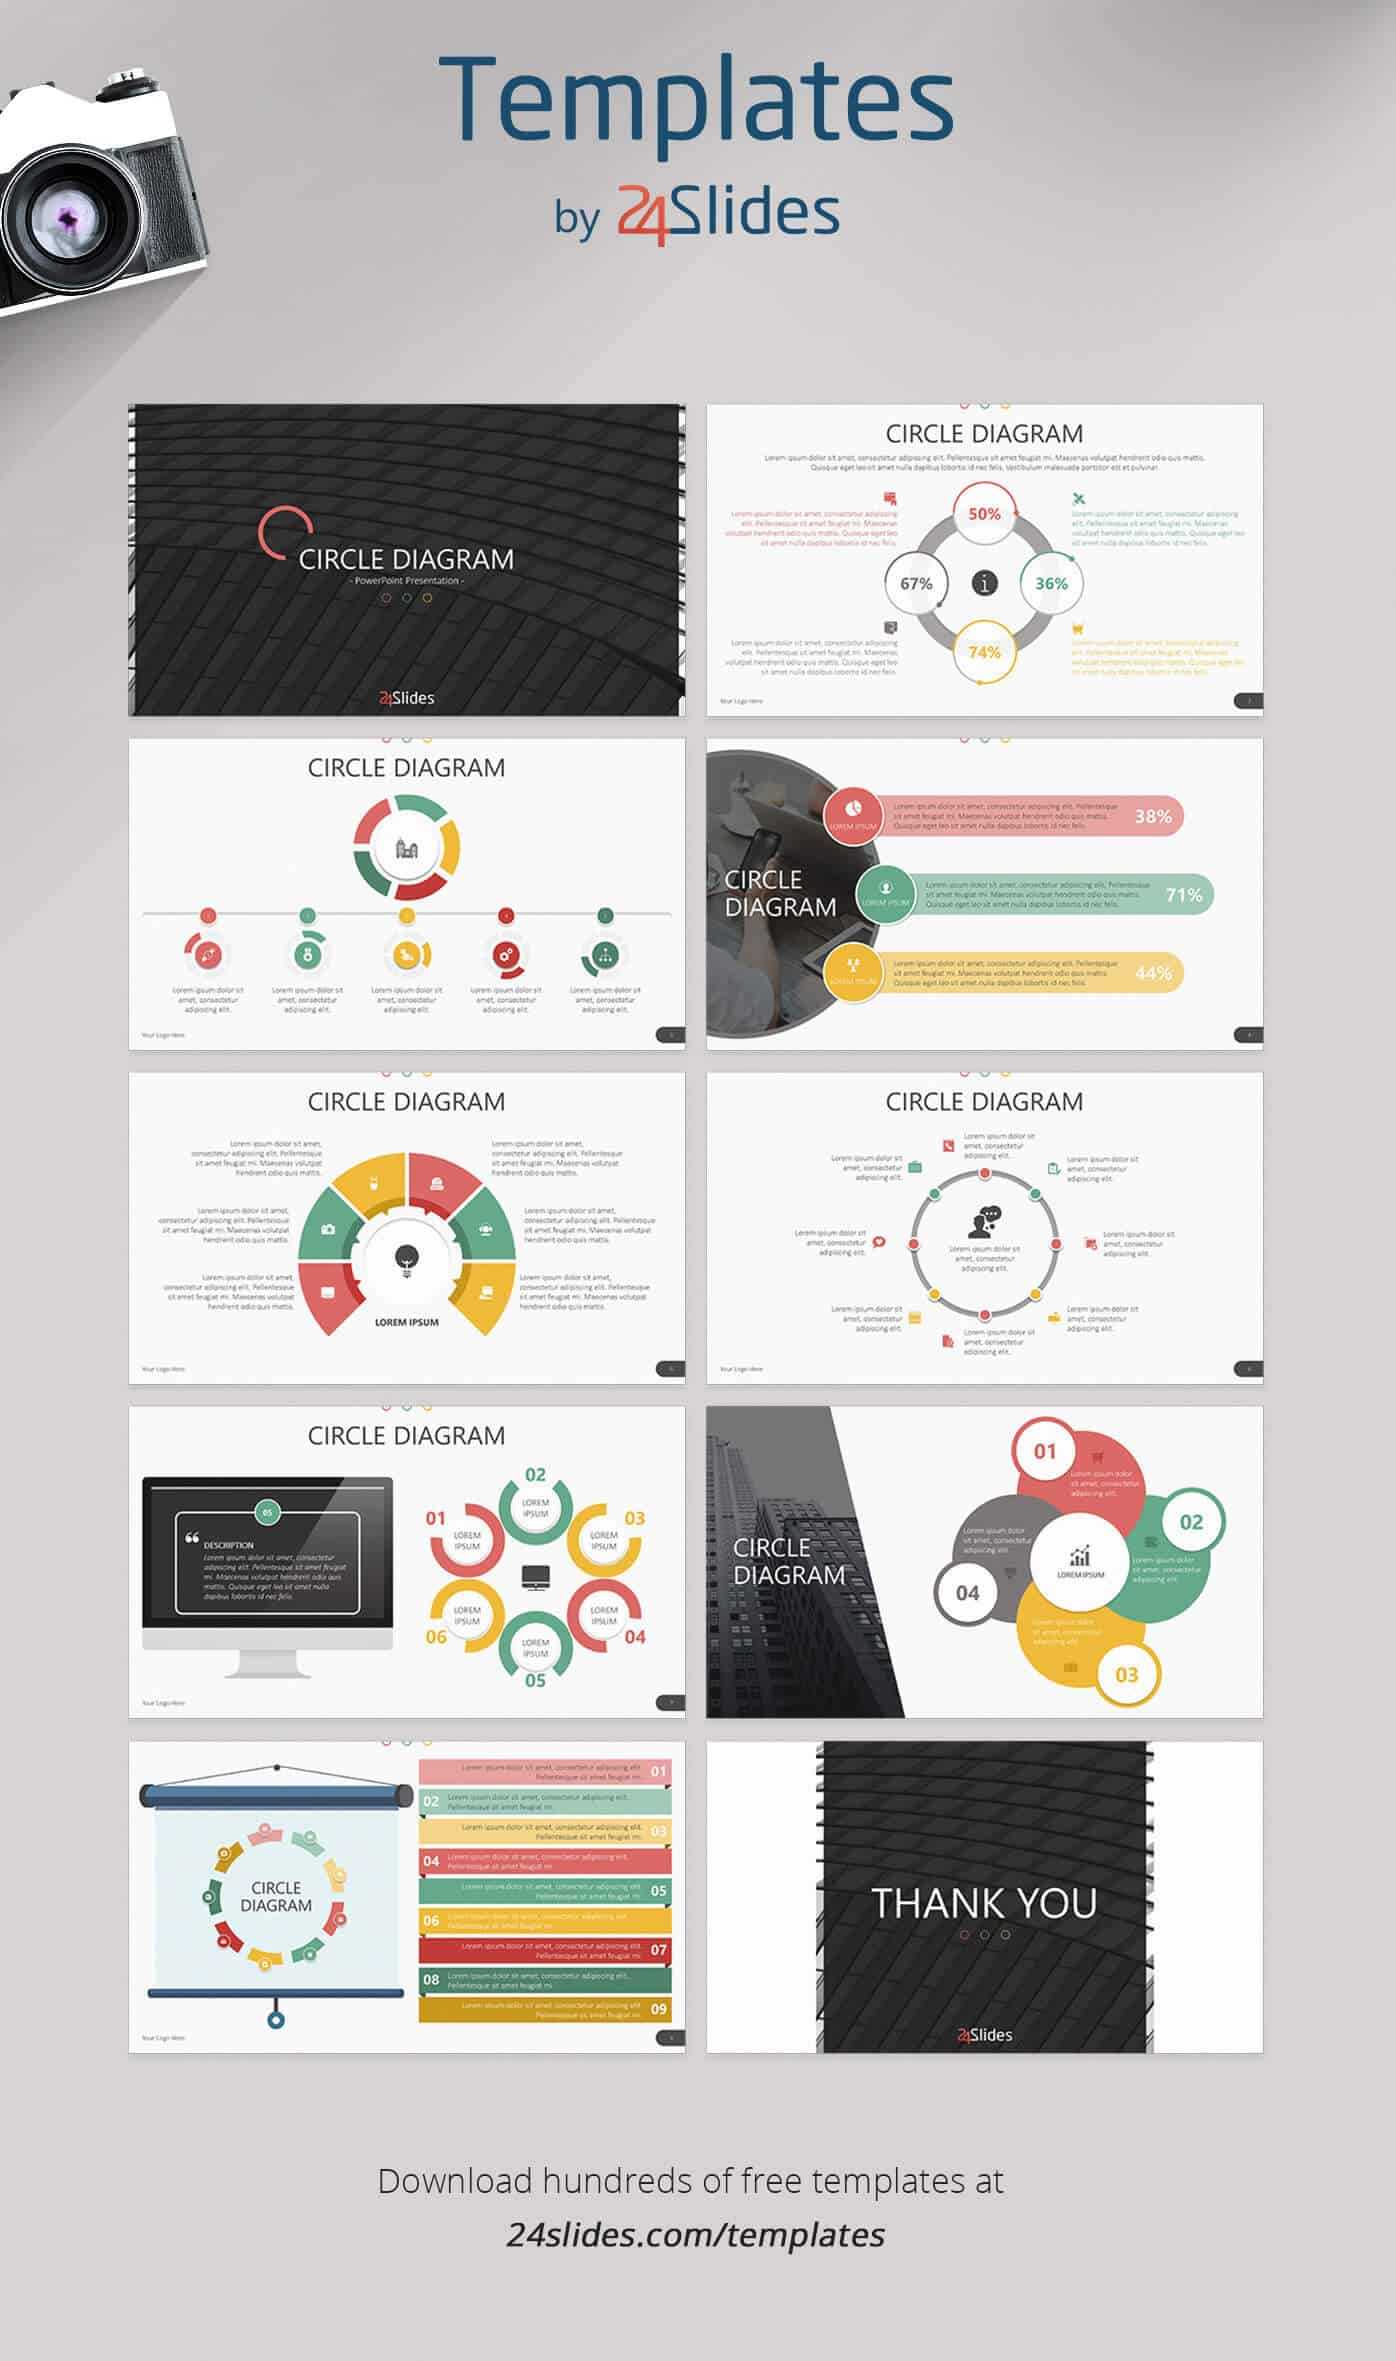 15 Fun And Colorful Free Powerpoint Templates | Present Better For How To Design A Powerpoint Template